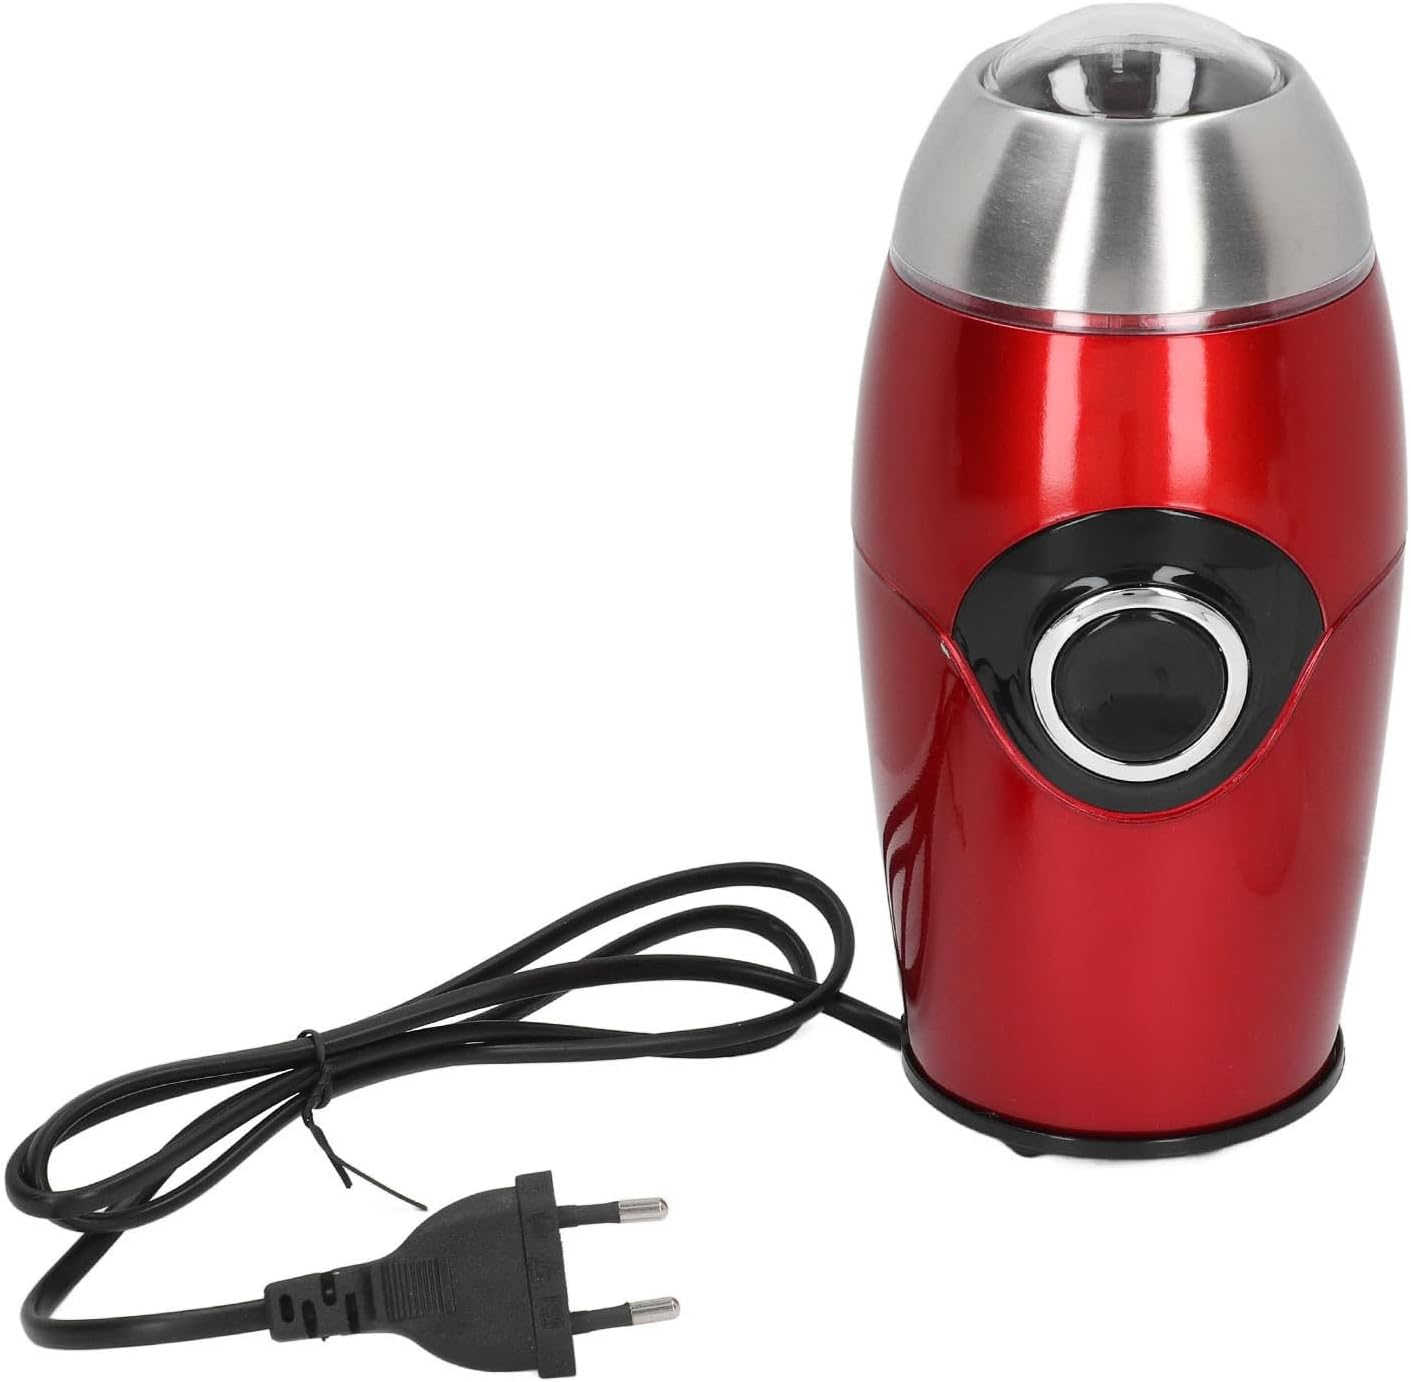 Electric Coffee Grinder, 200 W, Coffee Bean Grinder, One-Touch Spice Mill with Stainless Steel Blades for Beans, Herbs, Spices